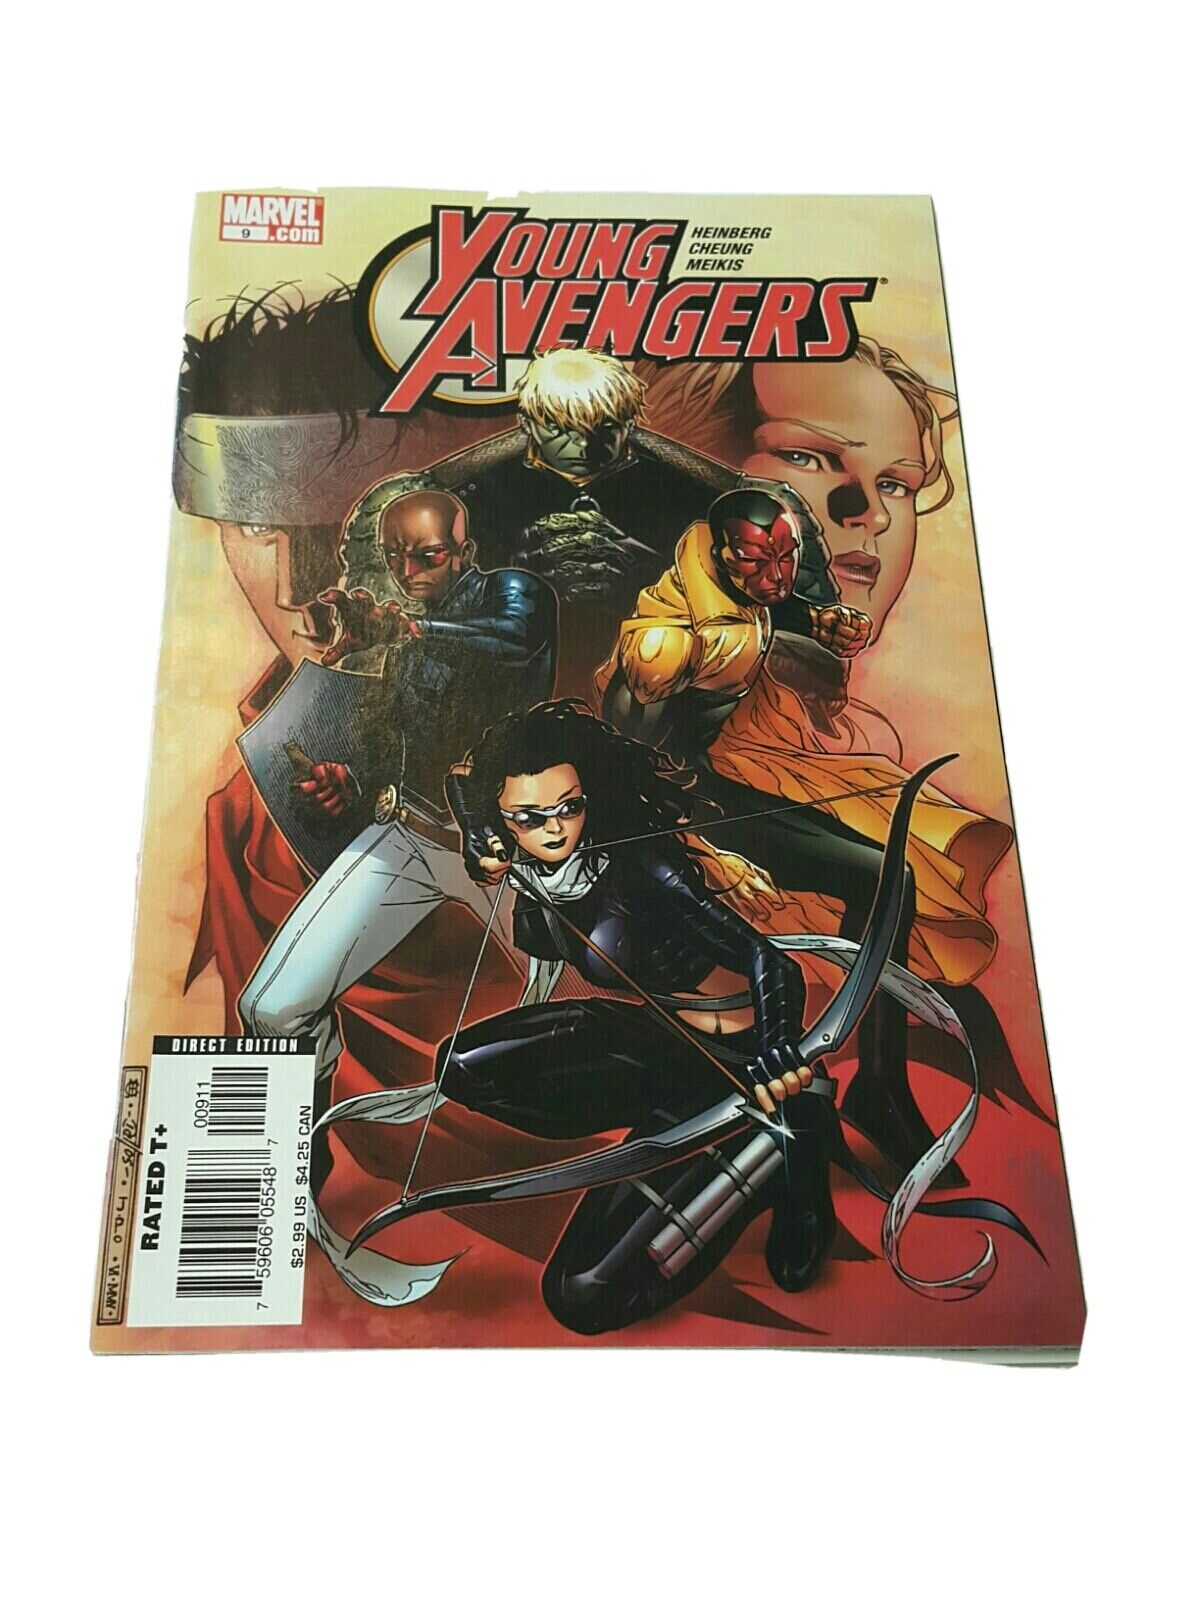 Young Avengers 9, (Marvel, Dec 2005), FN/VF, (7.0), 1st Kate Bishop as Hawkeye